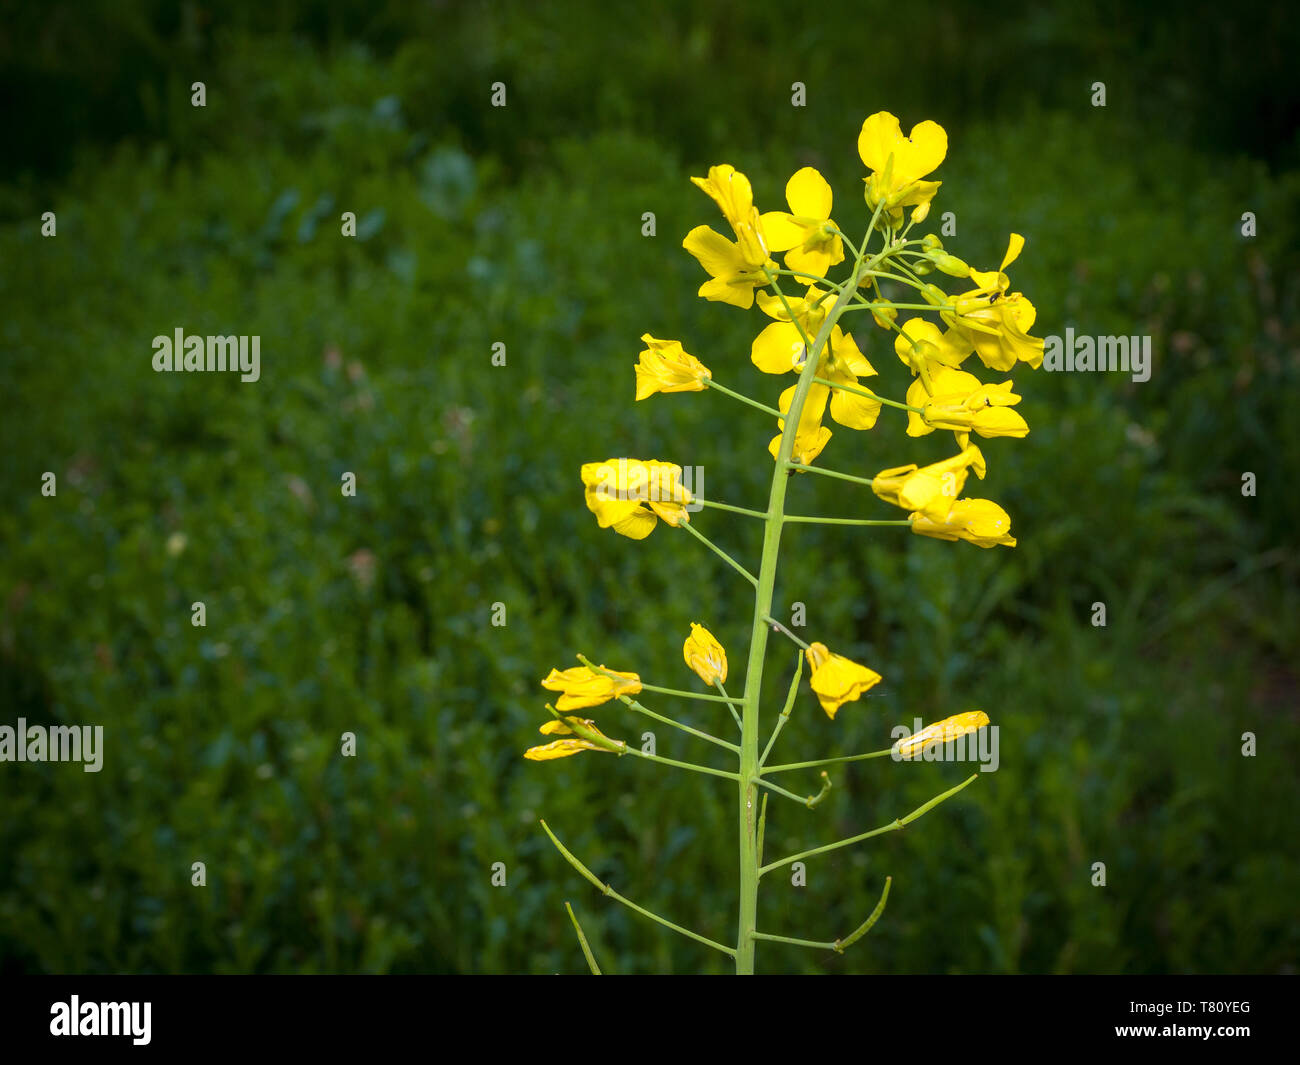 Single yellow canola plant flowering surrounded by grass. Stock Photo